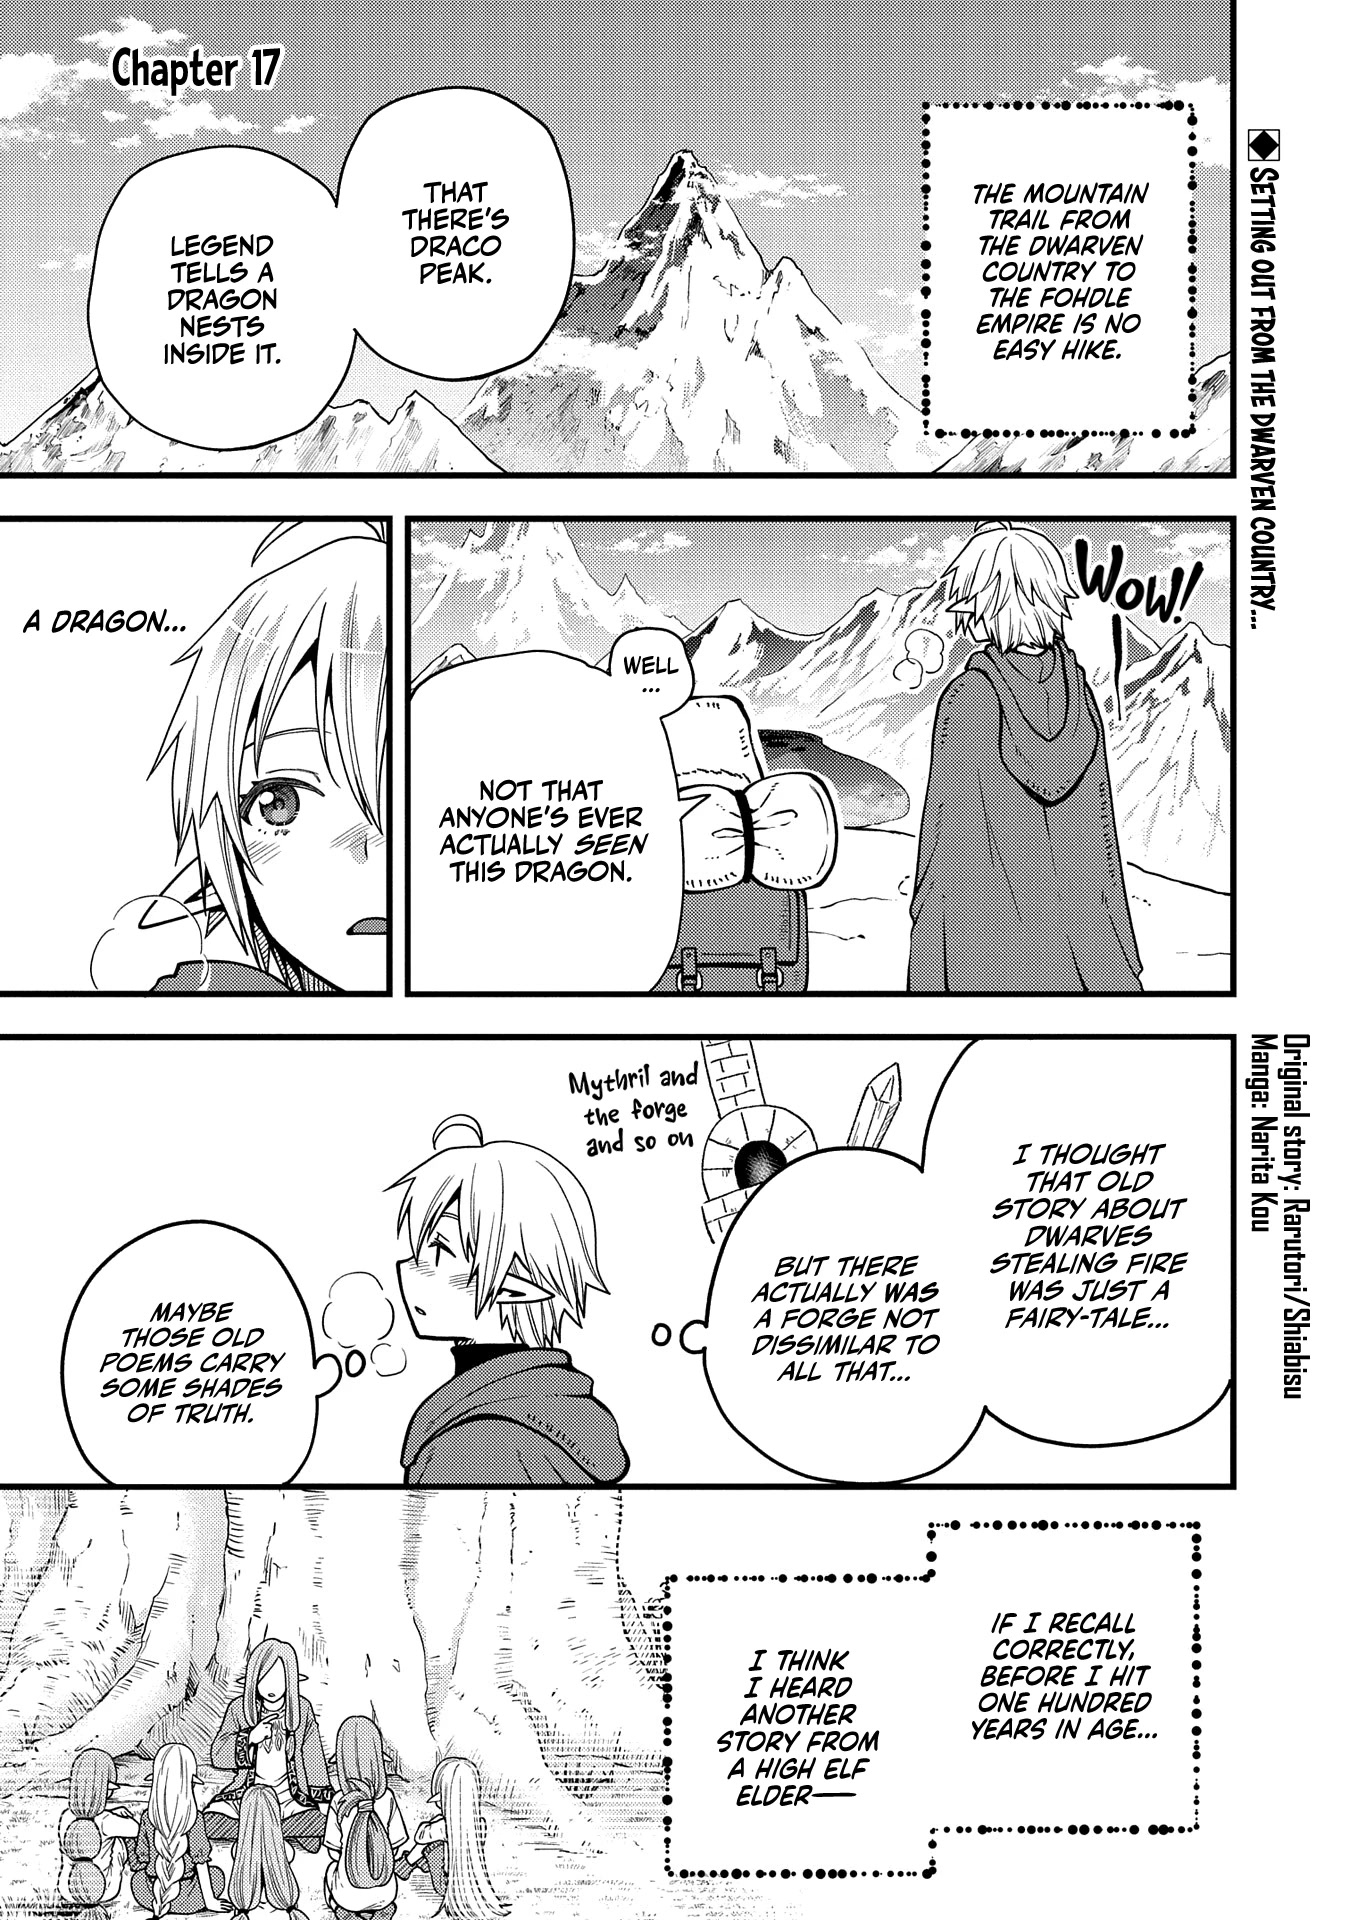 Growing Tired Of The Lazy High Elf Life After 120 Years Chapter 17 #2